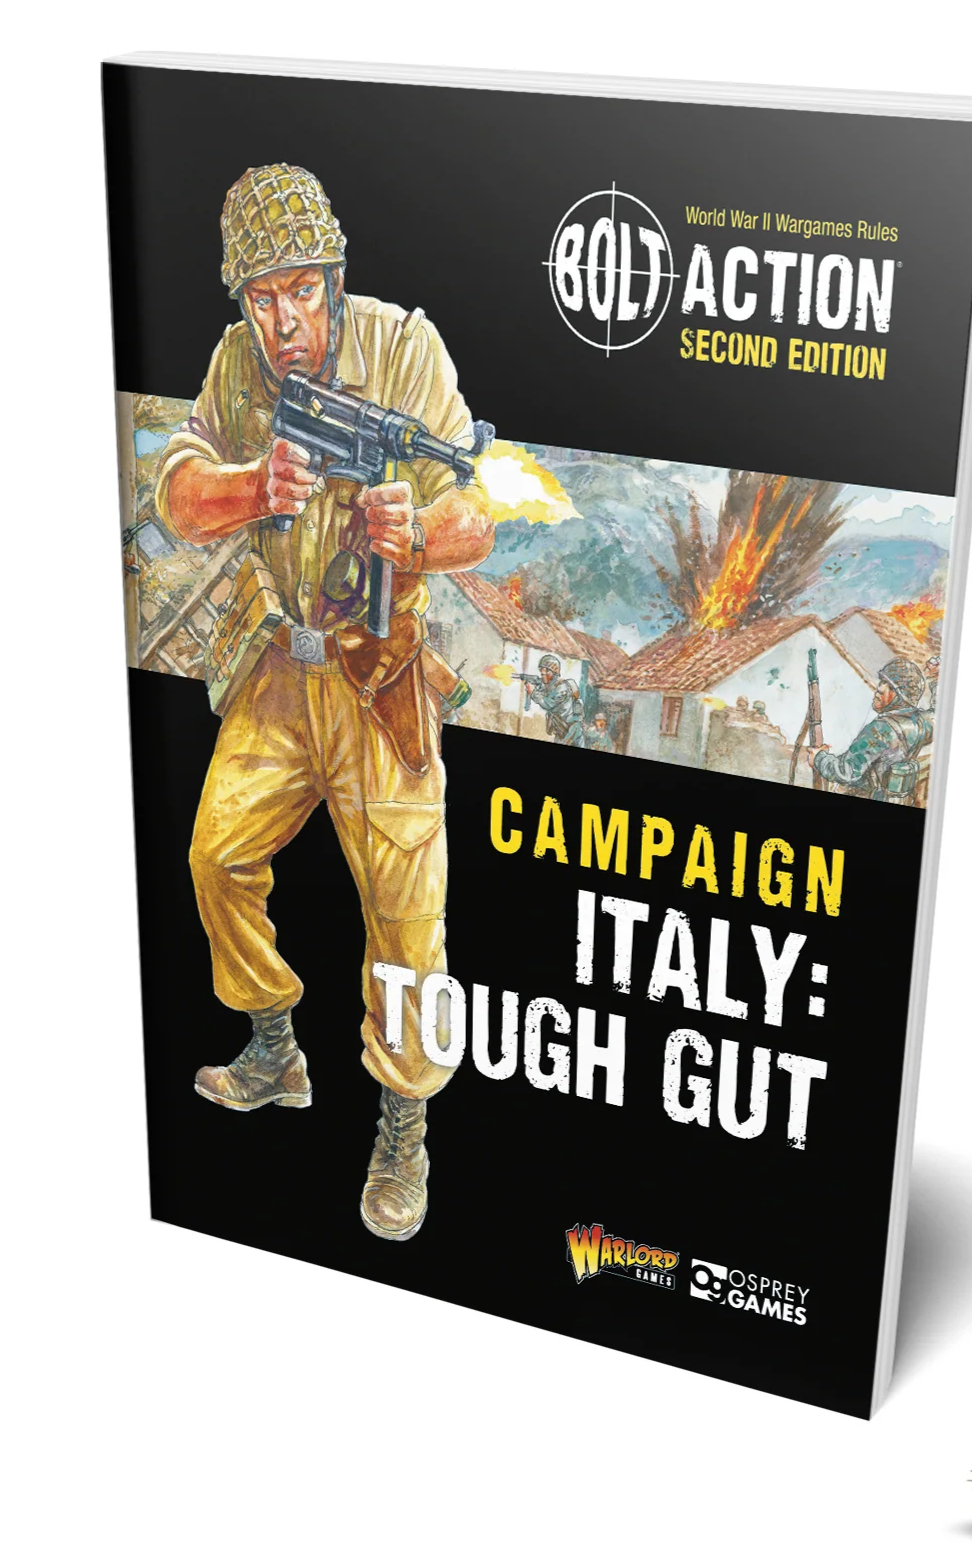 Bolt Action (2nd Edition): Campaign Italy Tough Gut 